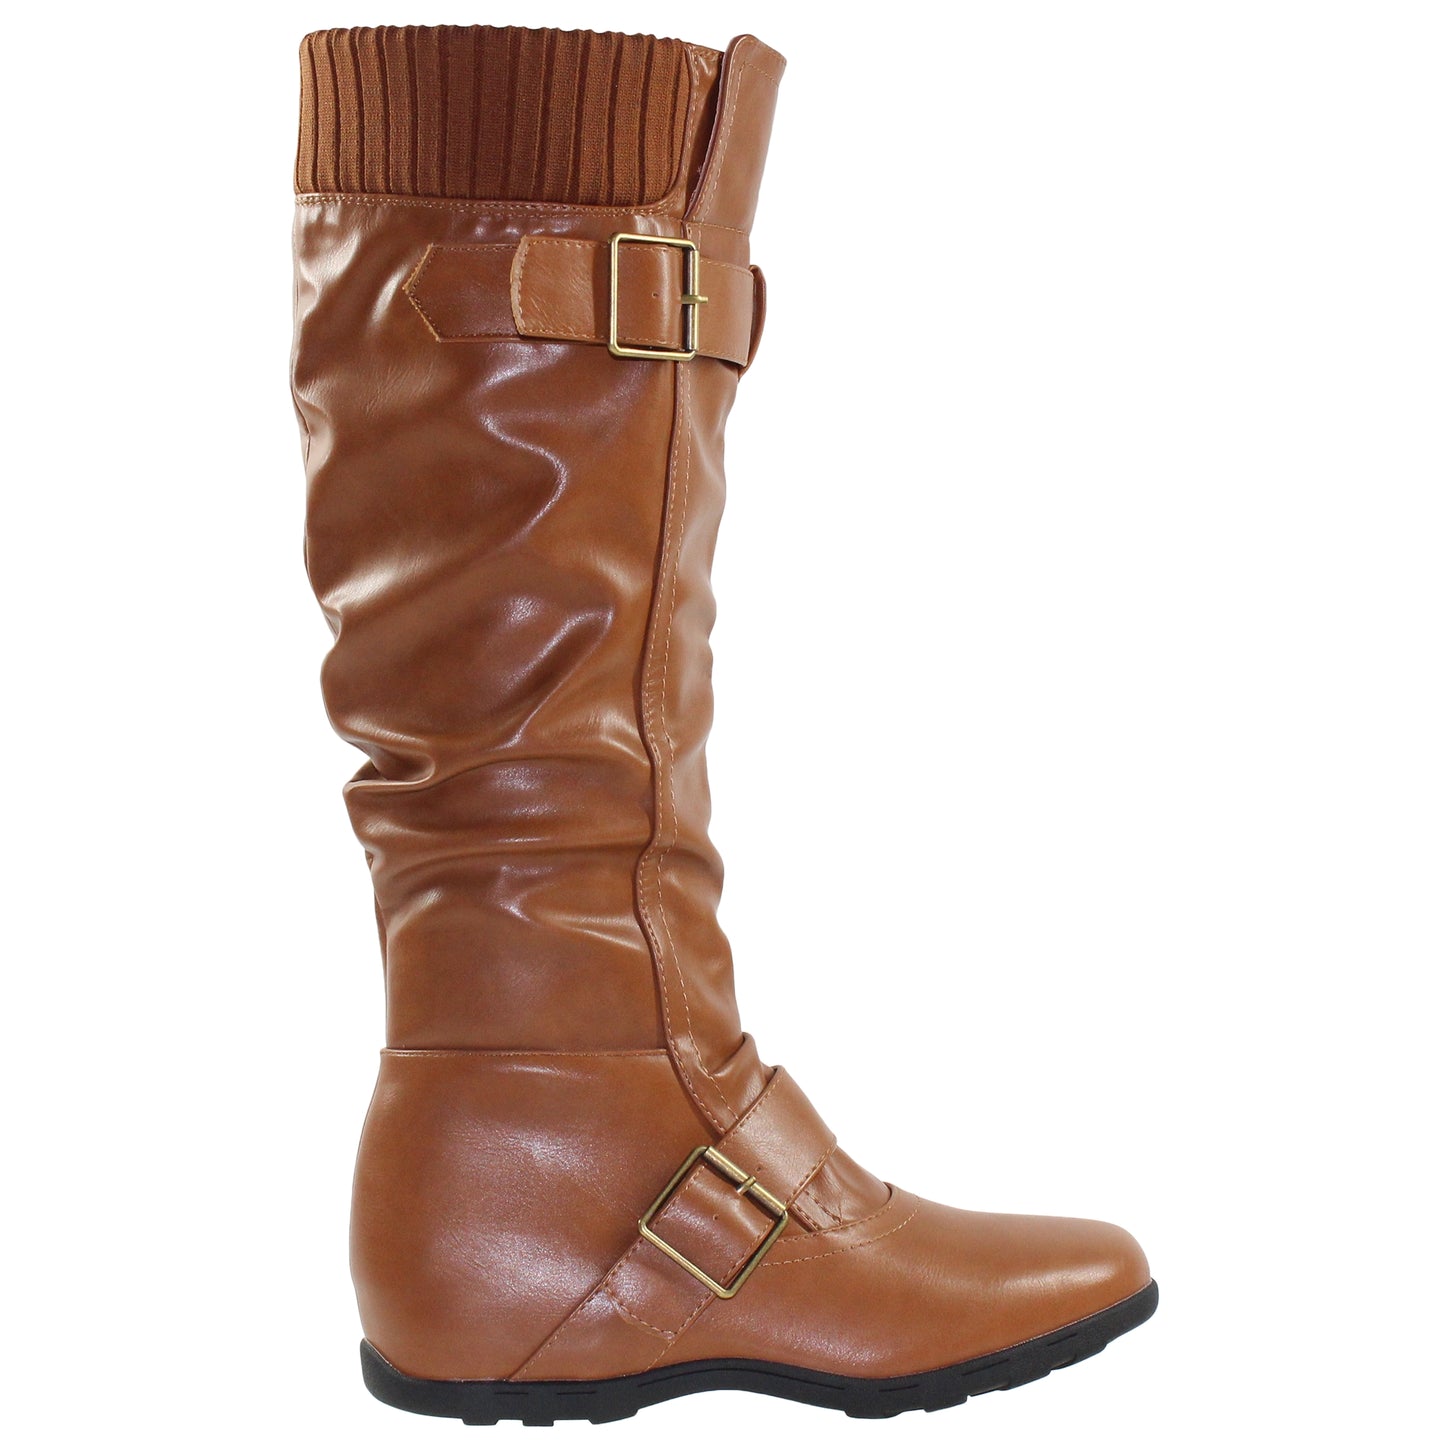 SOBEYO Women's Boots Ruched Knit Cuff Double Straps Buckles Tan Leather